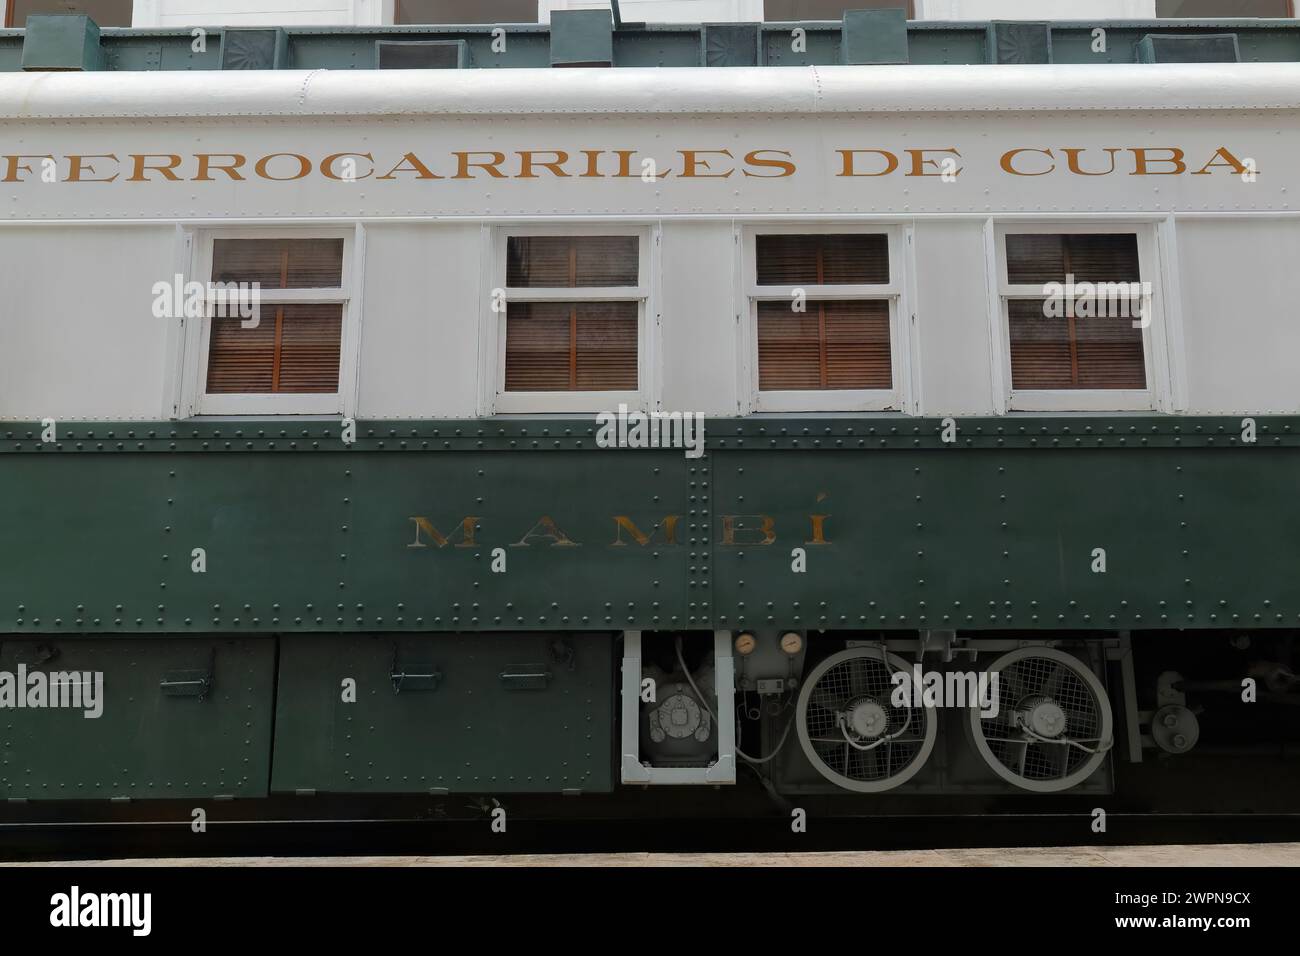 054 The Coche Mambi is the nation's former Presidential Train Carriage, restored and displayed in Churruca Street since 1911. Old Havana-Cuba. Stock Photo